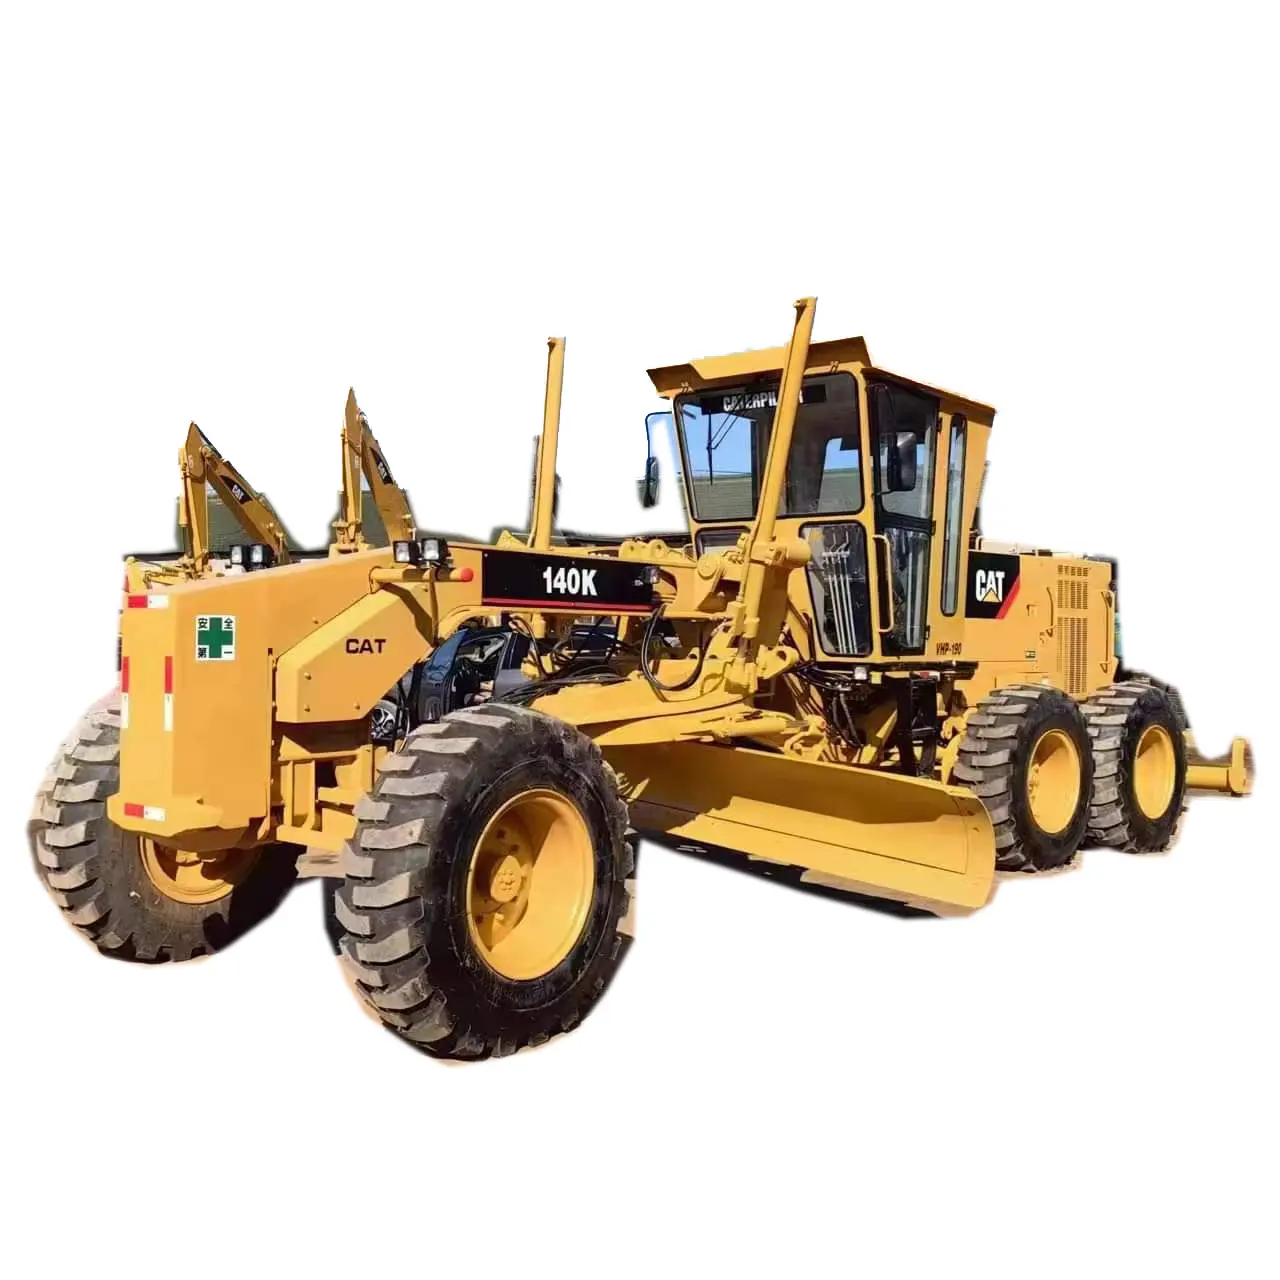 global hit sales caterpillar 140k motor grader sold a lower price of construction machinery